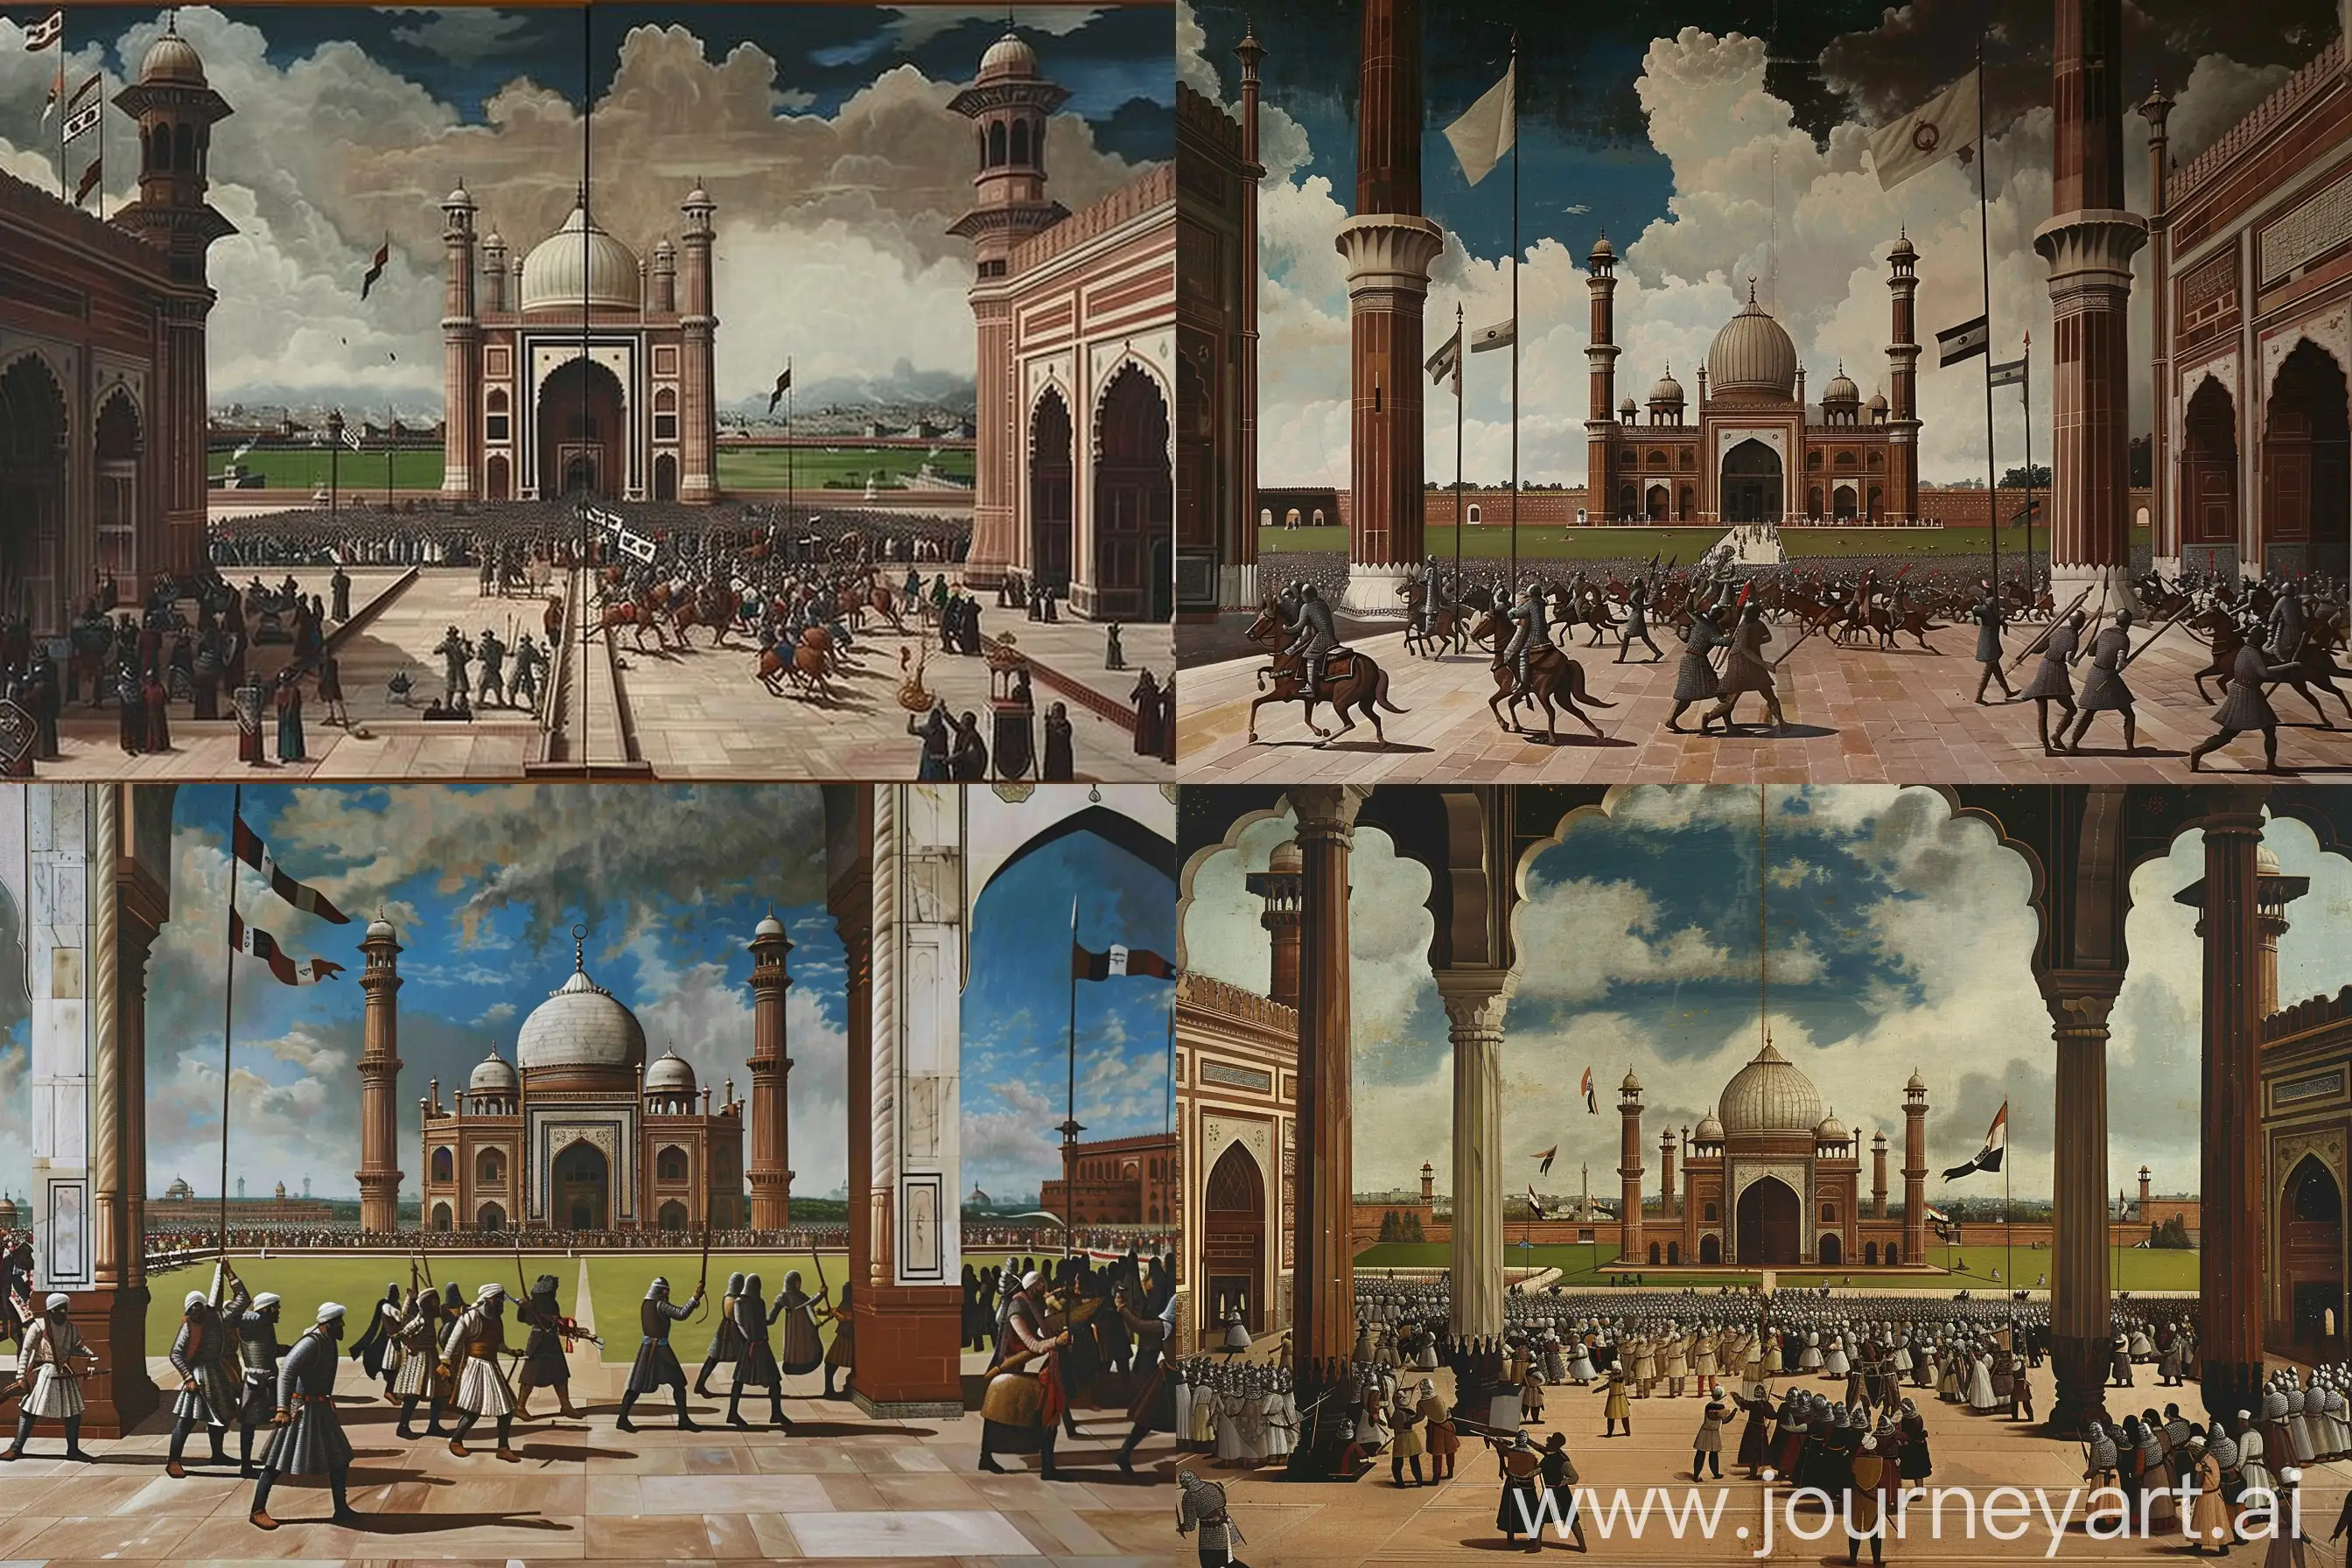 medieval Renaissance painting depicting a medieval battle scene between saracen knights and crusaders, in the courtyard of "Delhi Jama Masjid", lush green field in the background, cloudy sky, Knights carrying flags and banners, dark weather --ar 6:4 --v 6 --sref https://cdn.discordapp.com/attachments/1209182749441654865/1247644078070566992/Raffaello_-_Spozalizio_-_Web_Gallery_of_Art.jpg?ex=66621818&is=6660c698&hm=49cdfba24c1daa1010a13a6cfed345f6e2155a91c150a1aeace8309371da7c58& --cref <https://cdn.discordapp.com/attachments/1213041174428782623/1248168666818678875/jama-masjid-delhi.jpg?ex=6662af28&is=66615da8&hm=4a5c245cbffdfe8a32bb2e1f4a8a918bdcfa7493dfdf76f23d130c91854c26d0&> --cw 99 --q 1